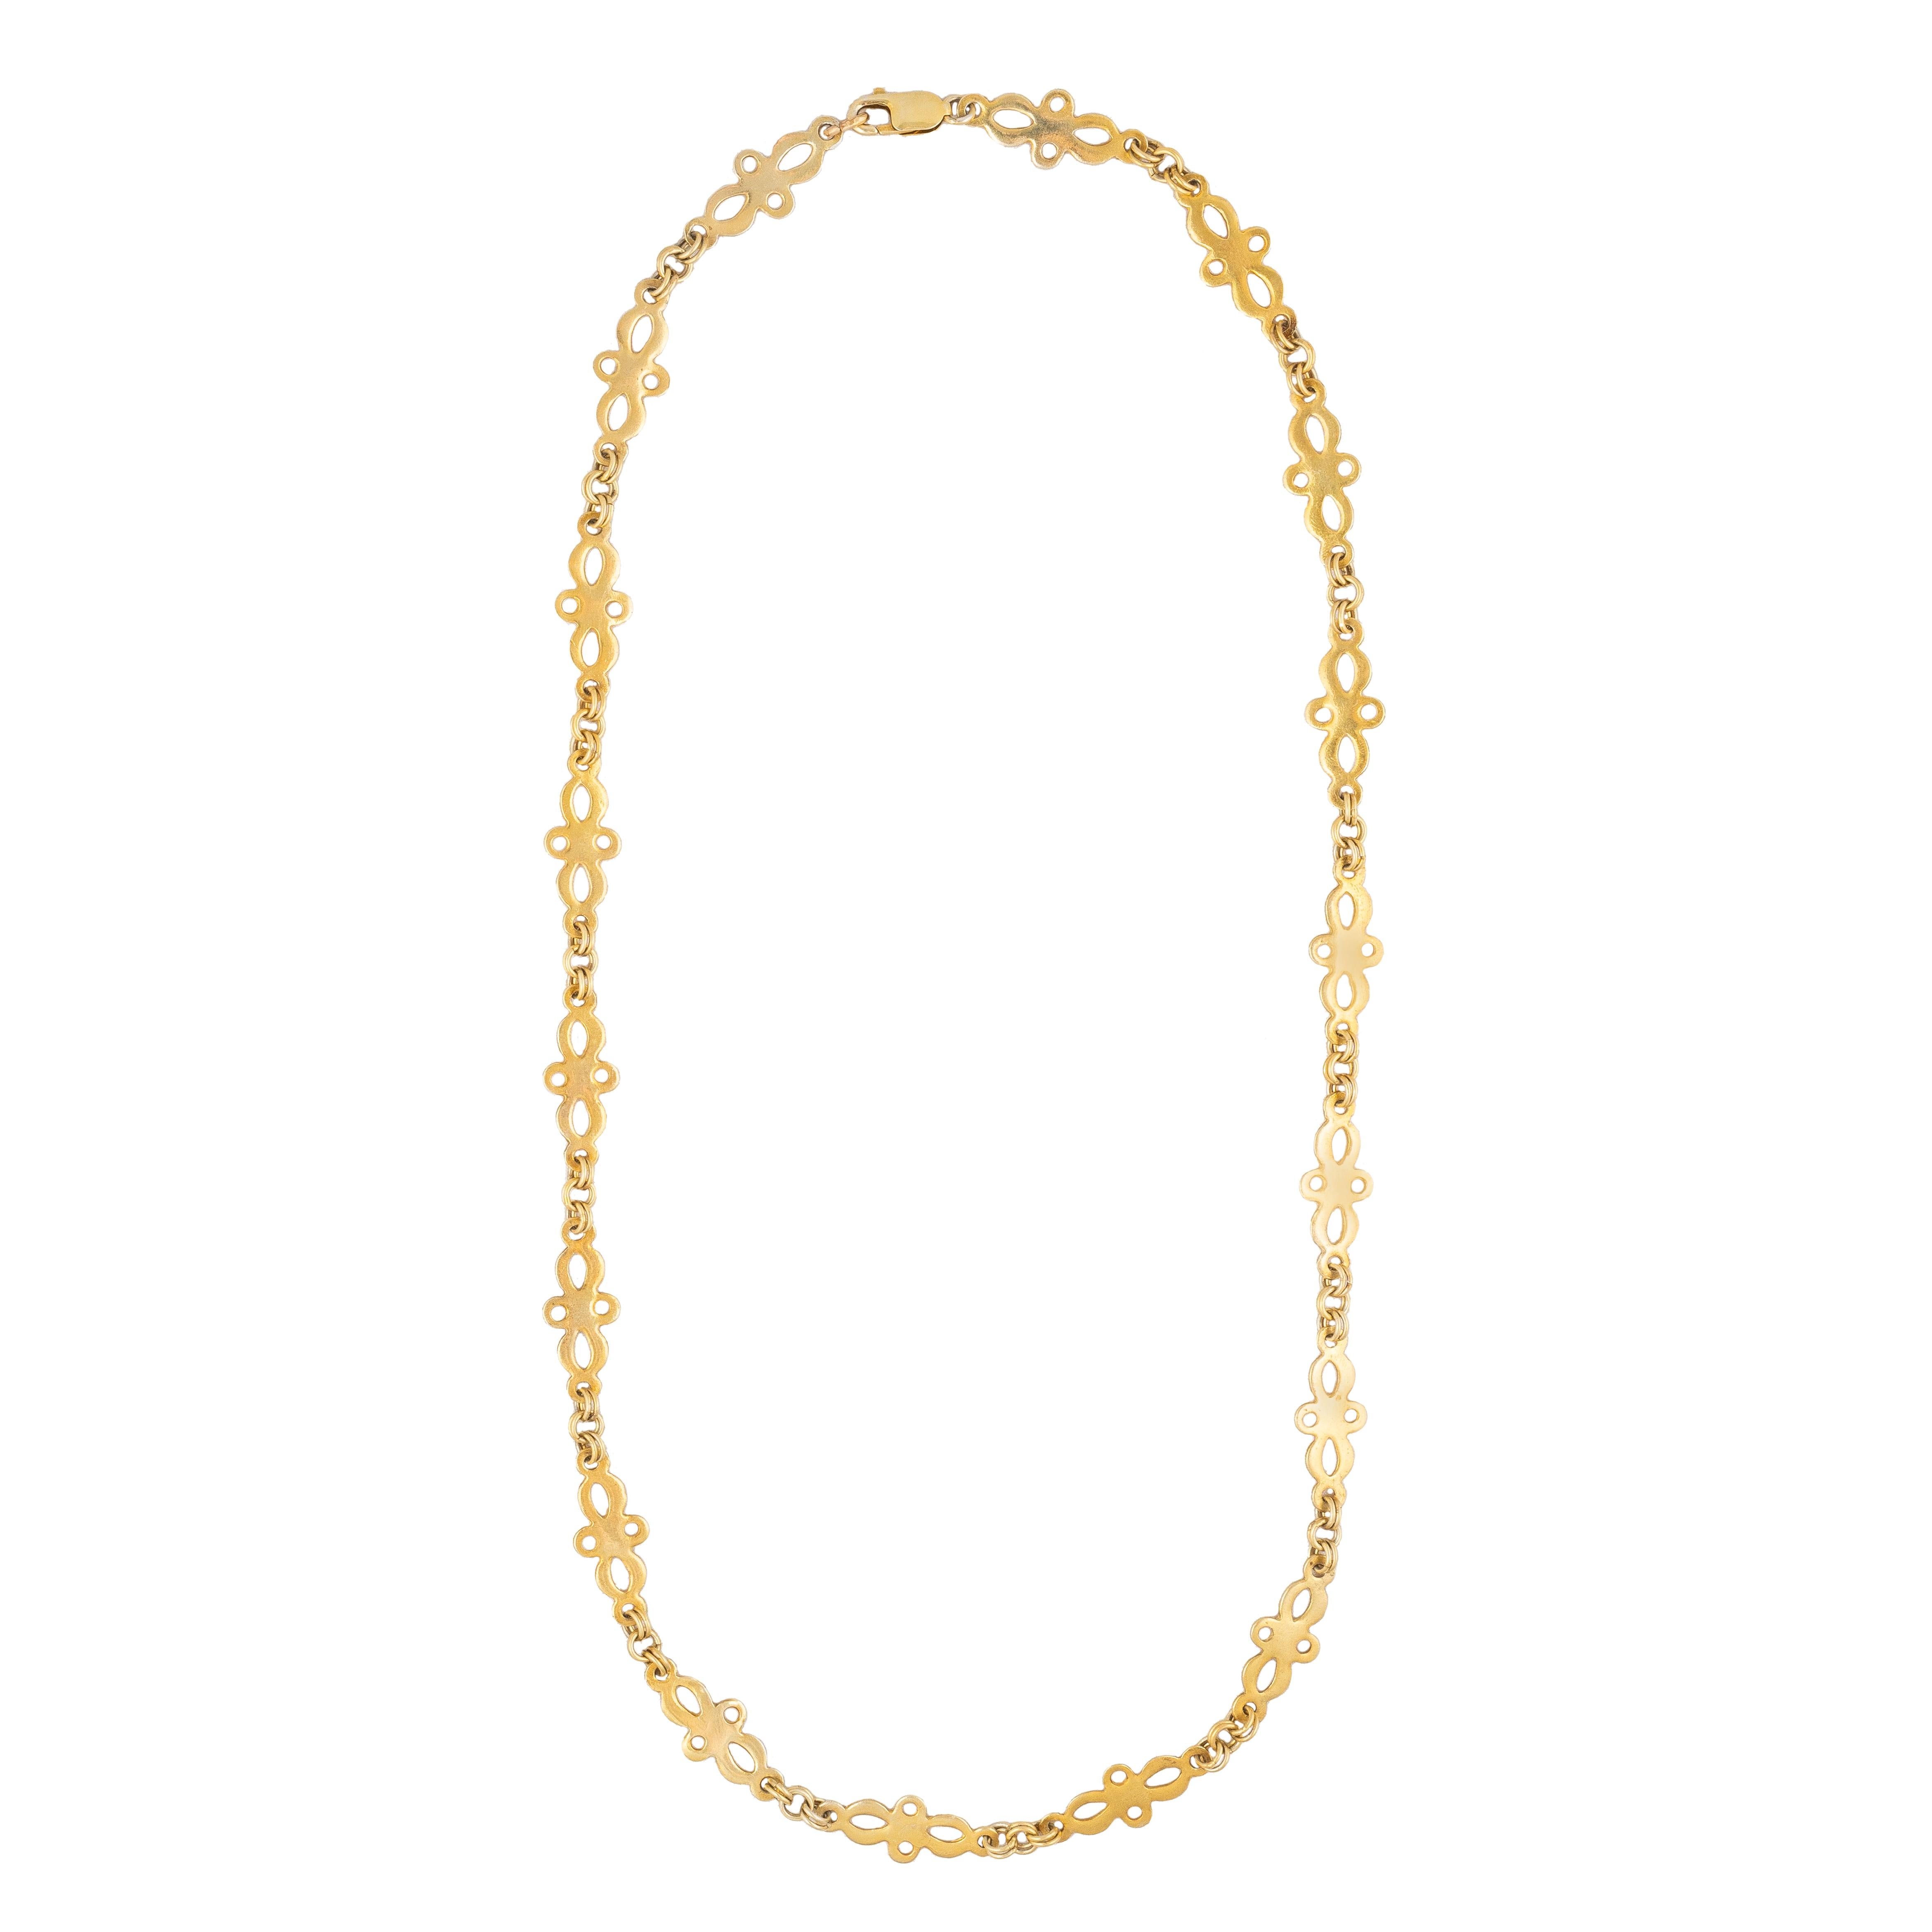 Inspired by Russian Orthodox chains of ancient Muscovy, this hand-finished chain comprises a line of eighteen shaped openwork links of gilded silver, each joined by double silver-gilded loops. Fitted with a lobster clasp.

Designed by Marie E.